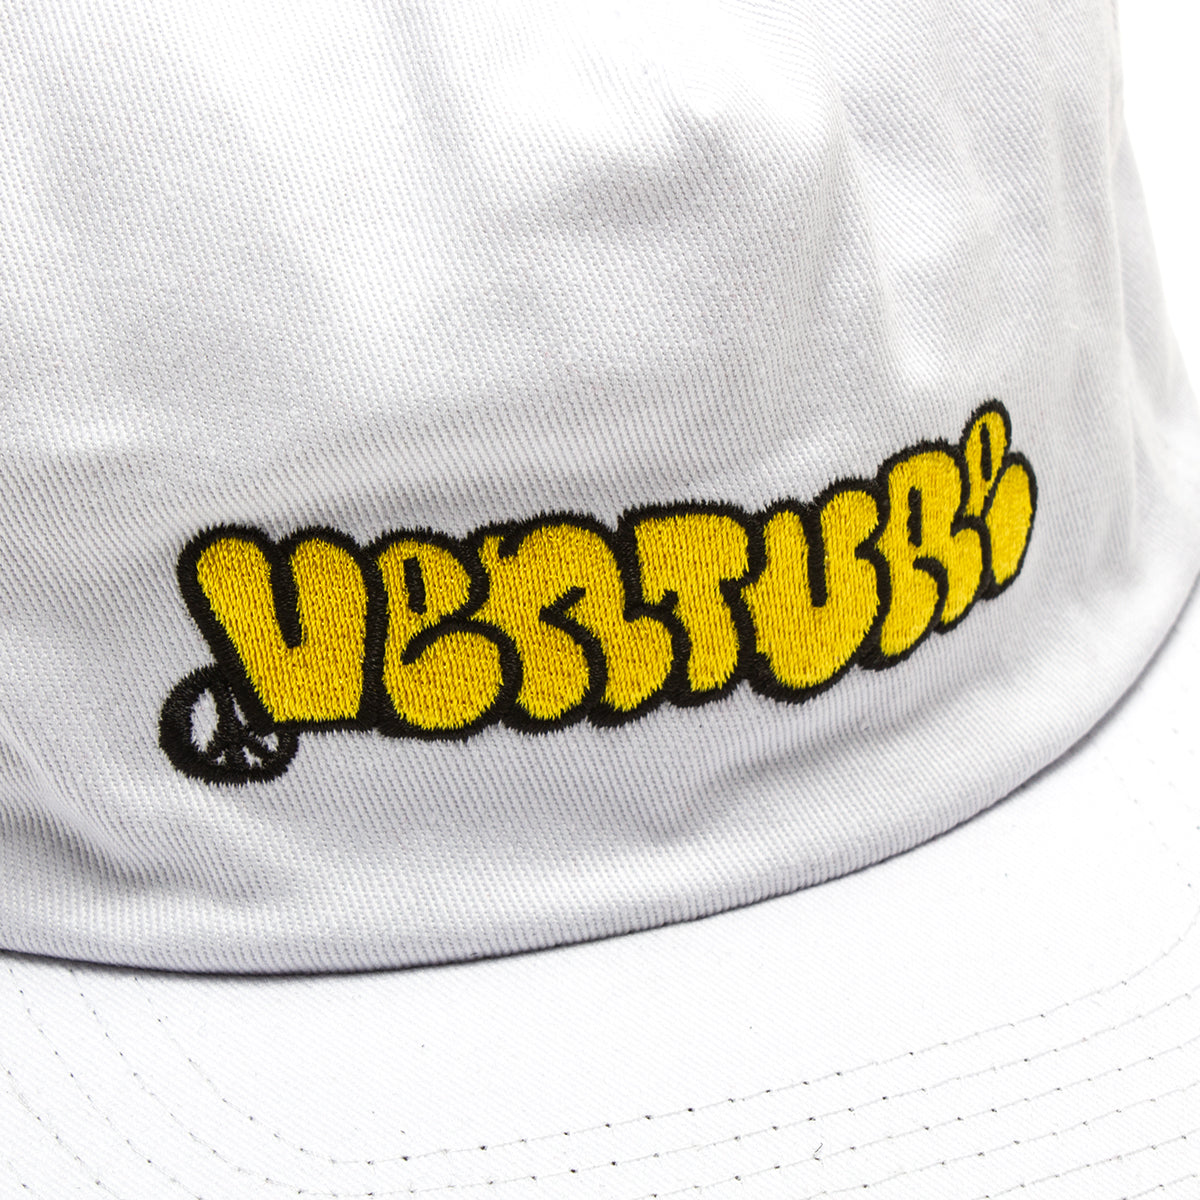 Venture | Throw Hat Style # 50051022A00 Color : White